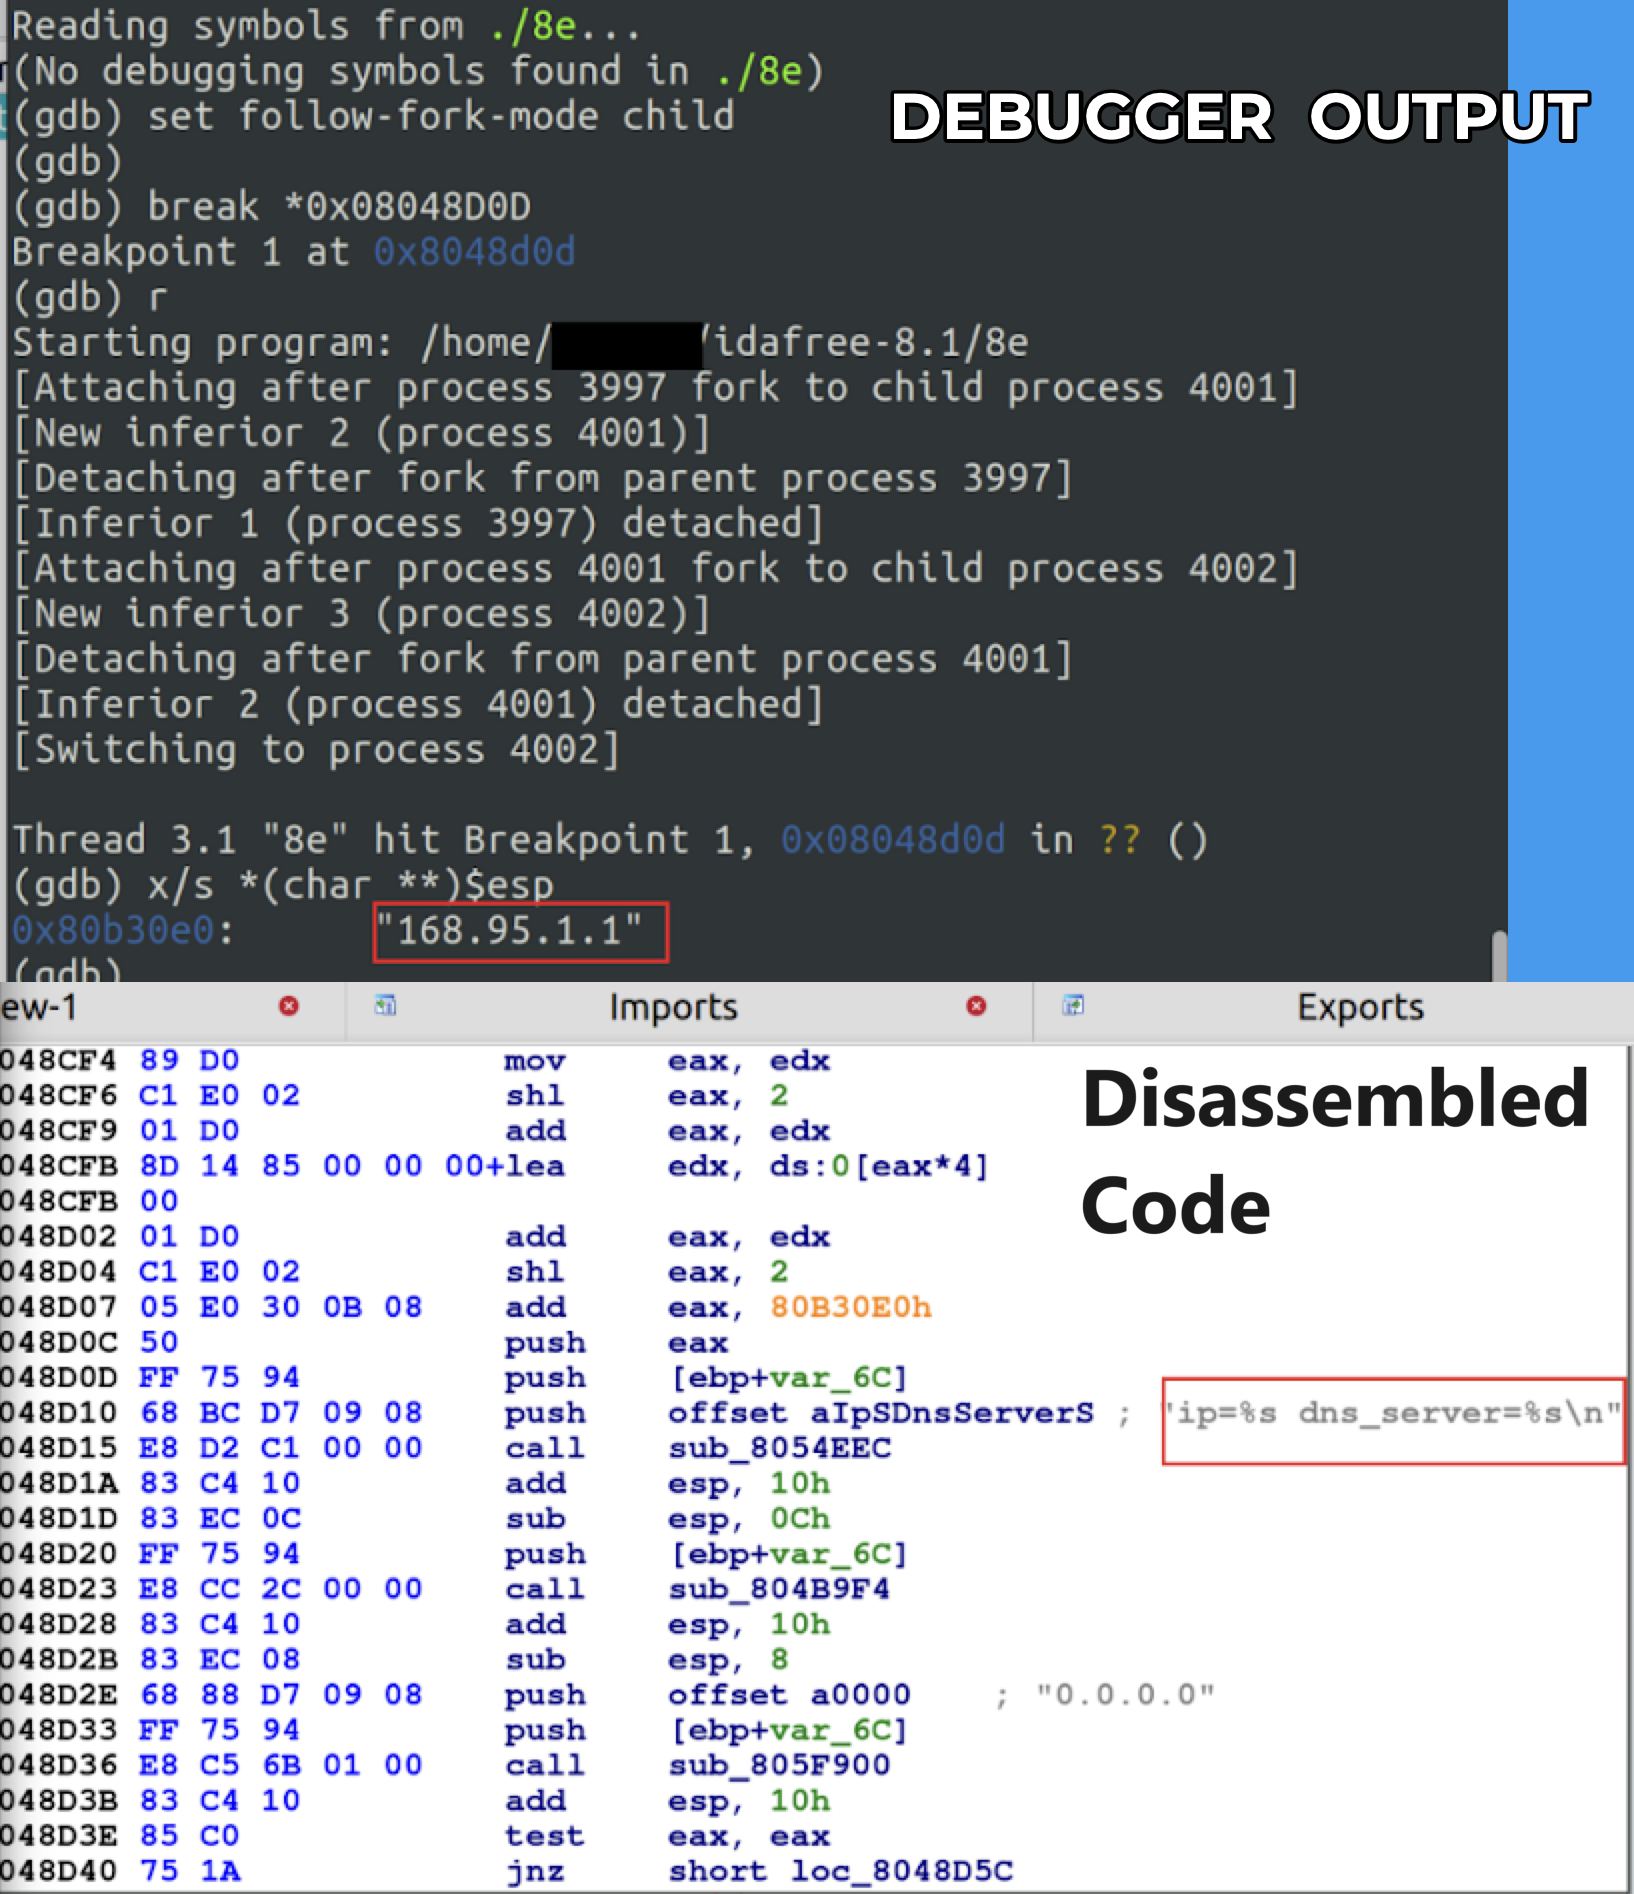 Image 7 is two stacked screenshots. The top screen screenshot is the deep, bugger output. Highlighted in a red box is the public DNS resolver. In the bottom screenshot, which is the disassembled code, a Redbox highlights, the DNS server code.